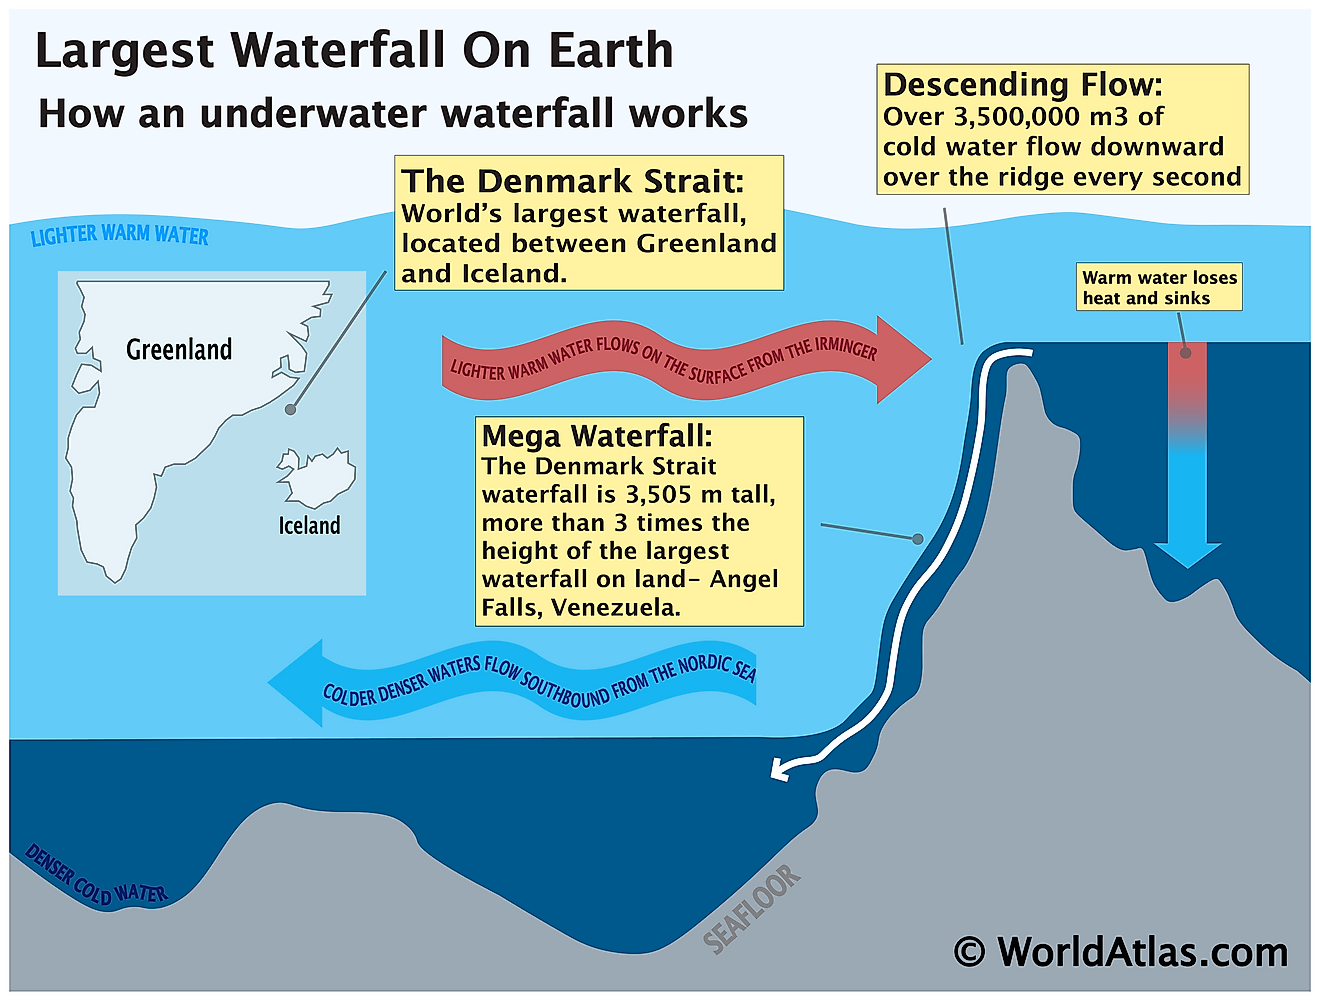 Where Is The World's Largest Waterfall?